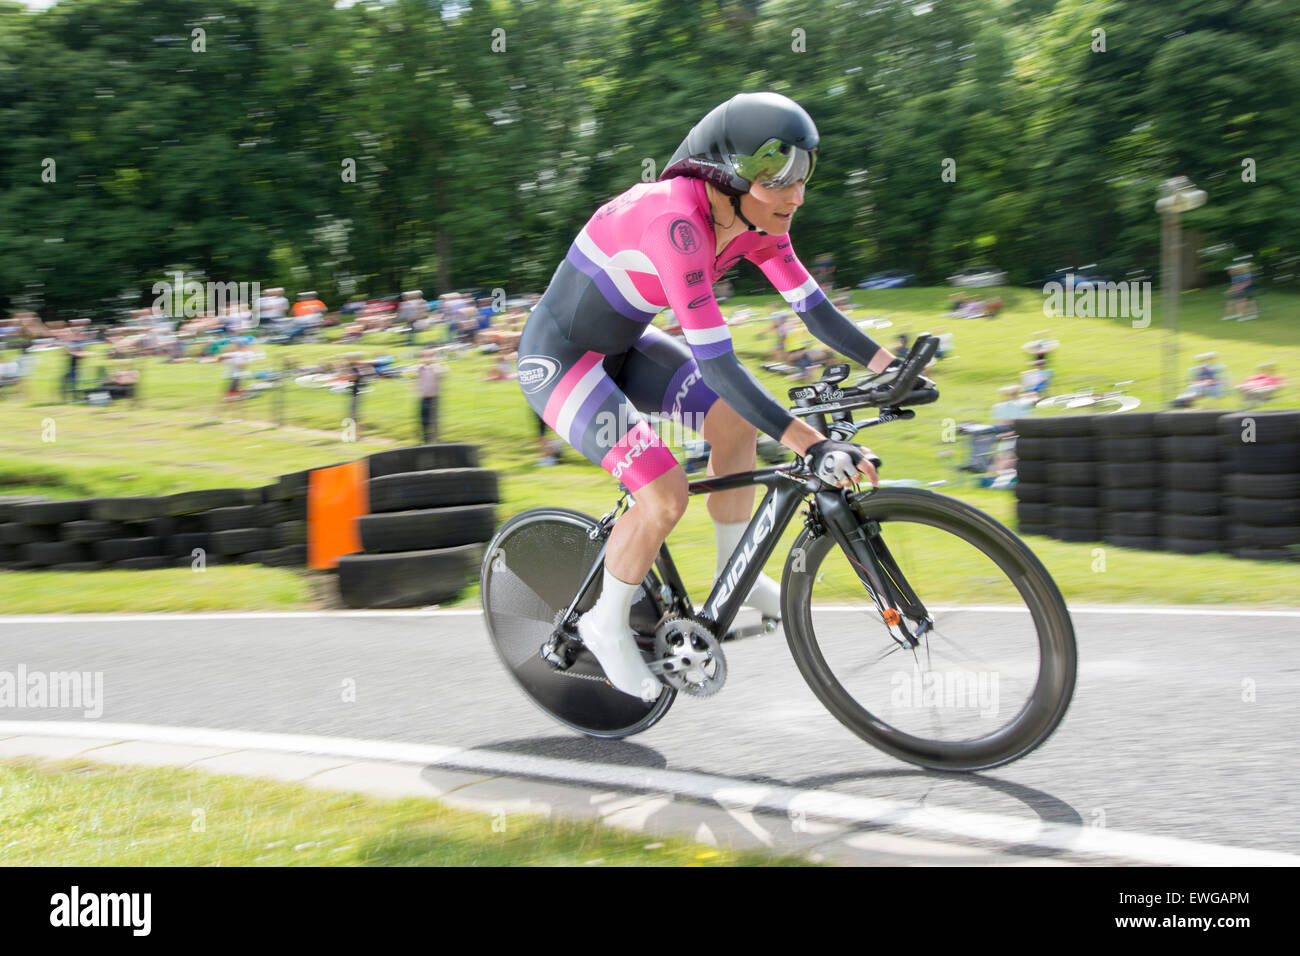 Lincoln, UK. 25th June, 2015. Dame Sarah Storey competes in the British Cycling Time Trial Championships at Cadwell Park near Lincoln, United Kingdom on 25 June 2015. Storey claimed third place behind Hayley Simmonds (Team Velosport) and Molly Weaver (Liv Plantur). Credit:  Andrew Peat/Alamy Live News Stock Photo